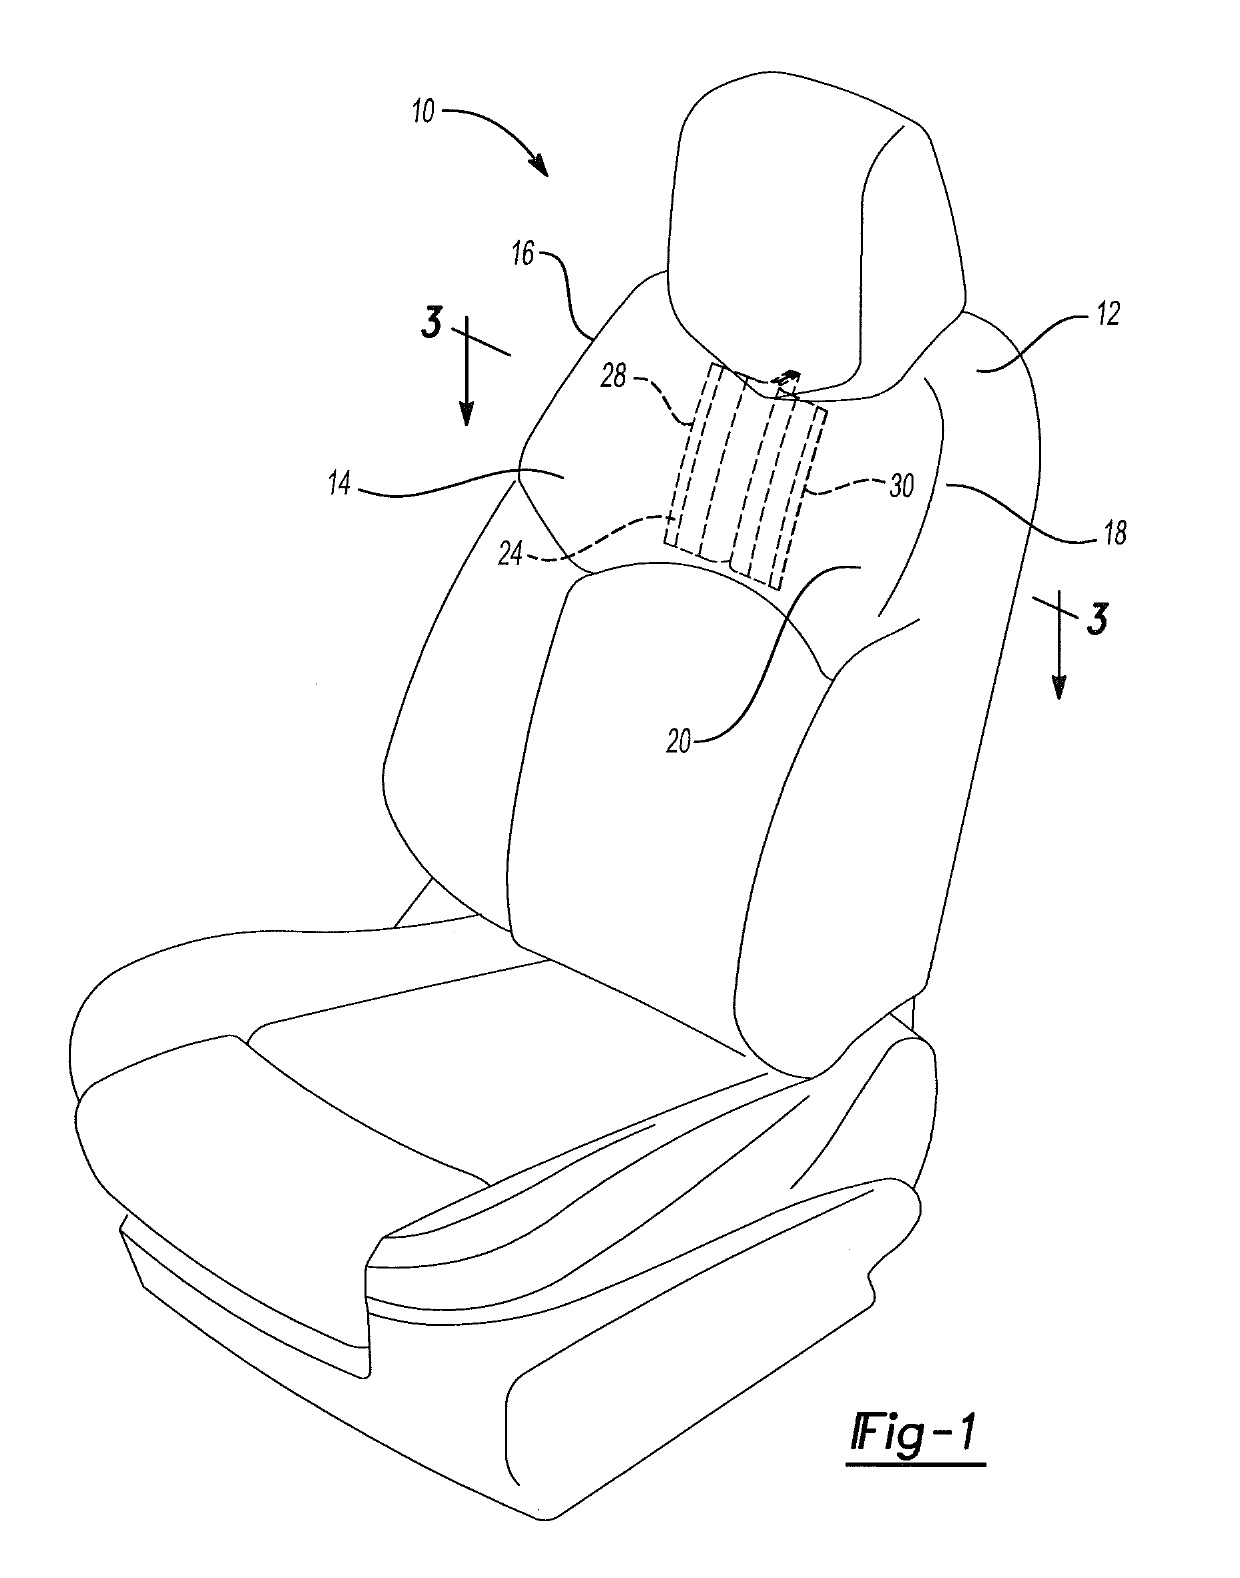 Cover panel for vehicle seat with invisible tie-down